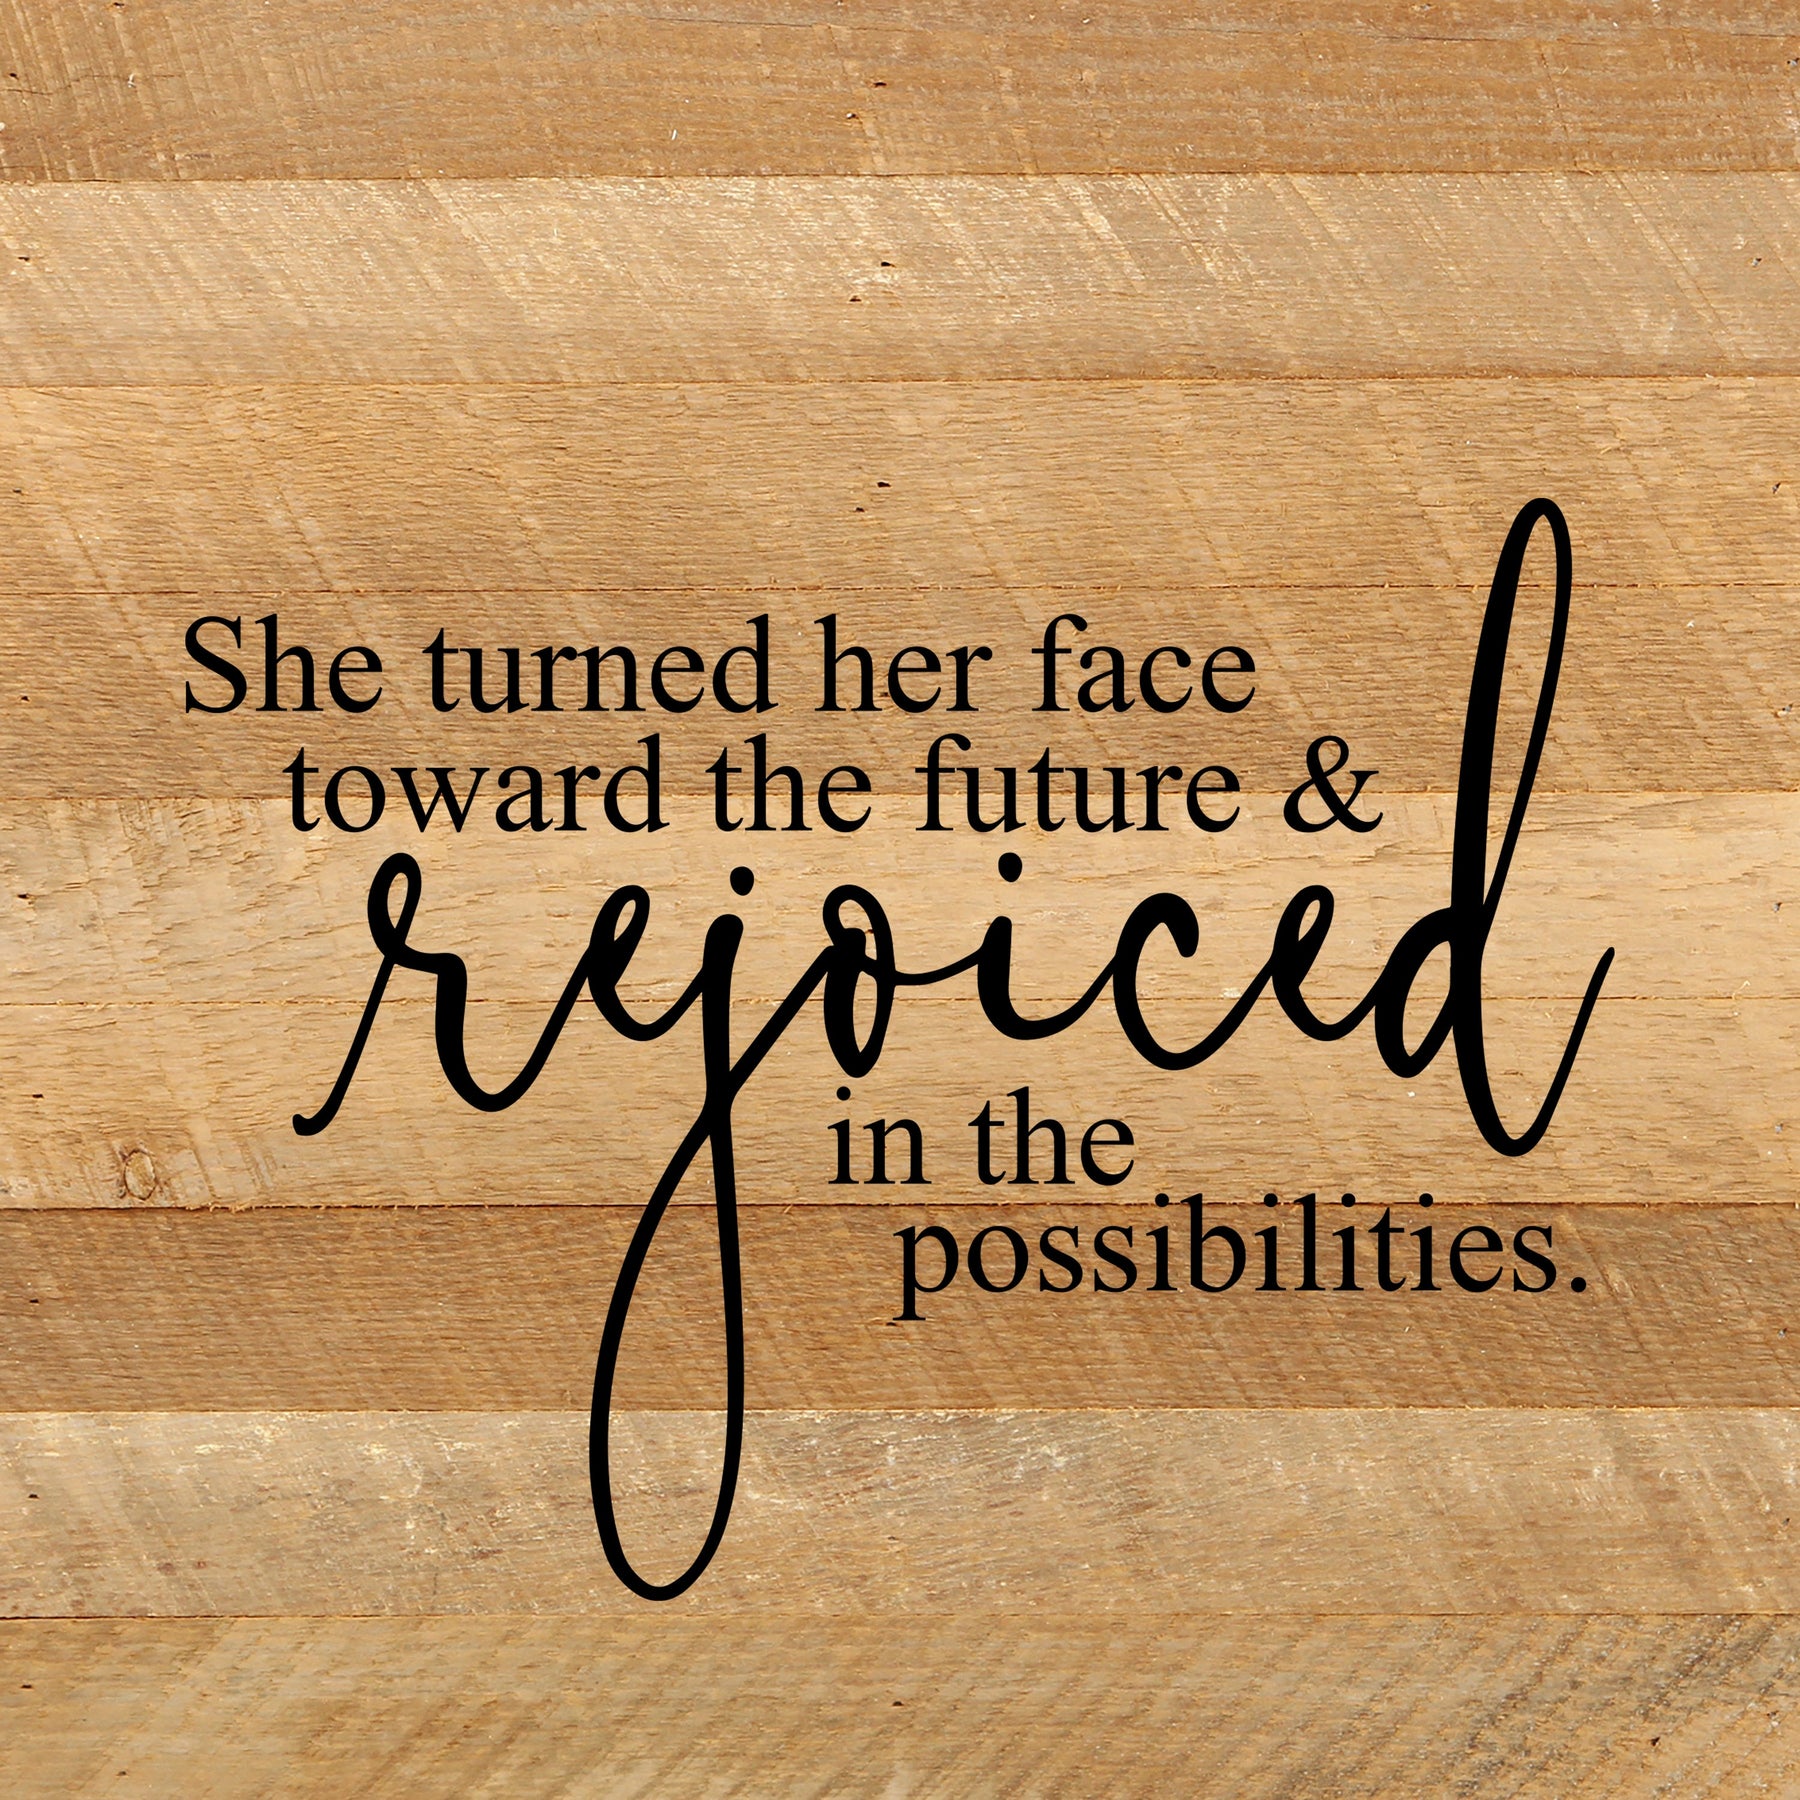 She turned her face toward the future & rejoiced in the possibilities / 10"x10" Reclaimed Wood Sign